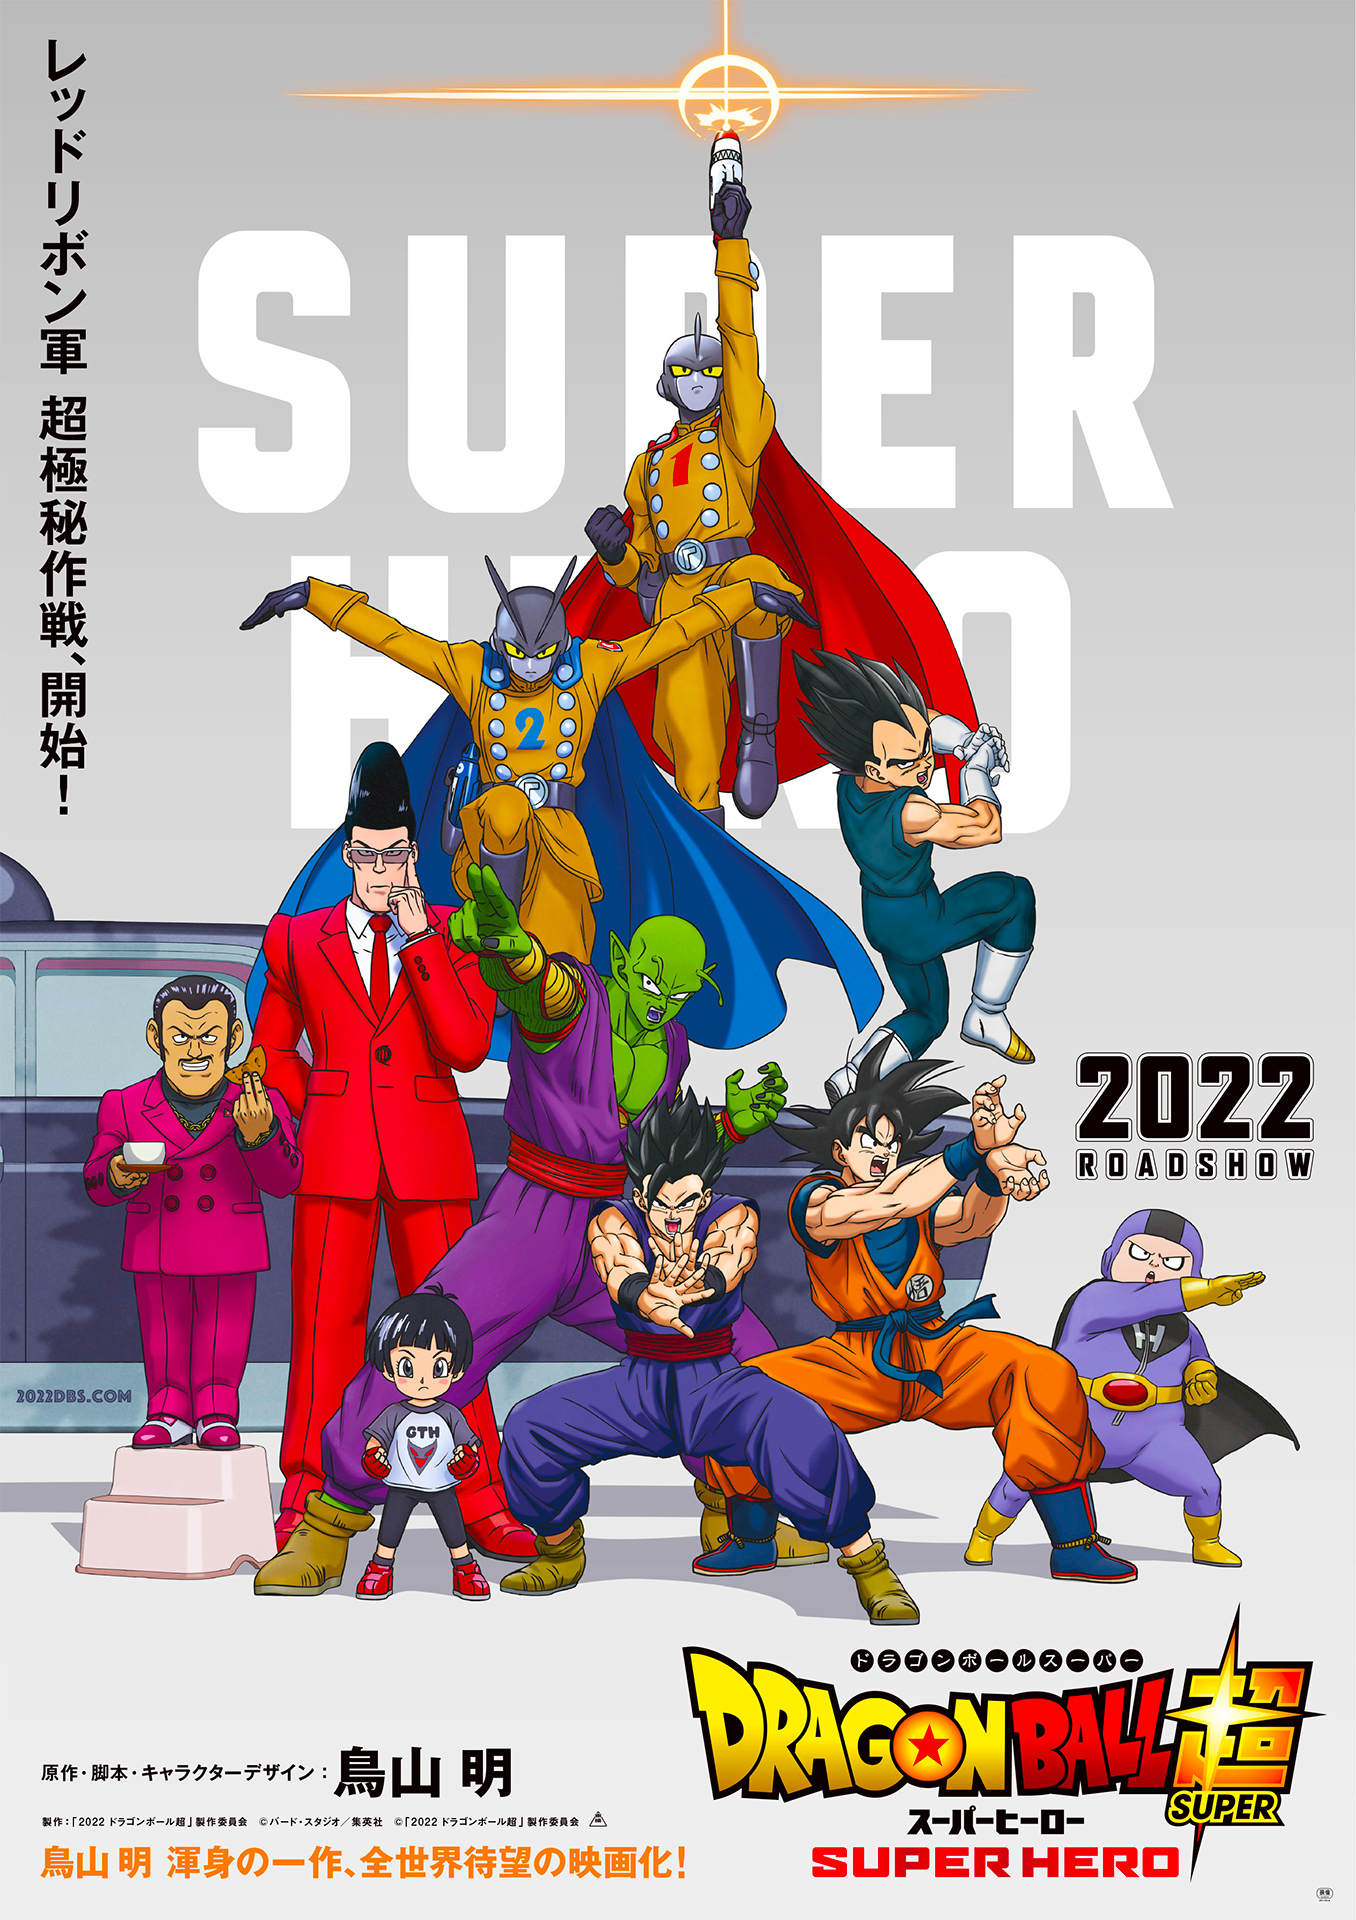 DRAGON BALL SUPER: Super Hero, here is the poster of the new film